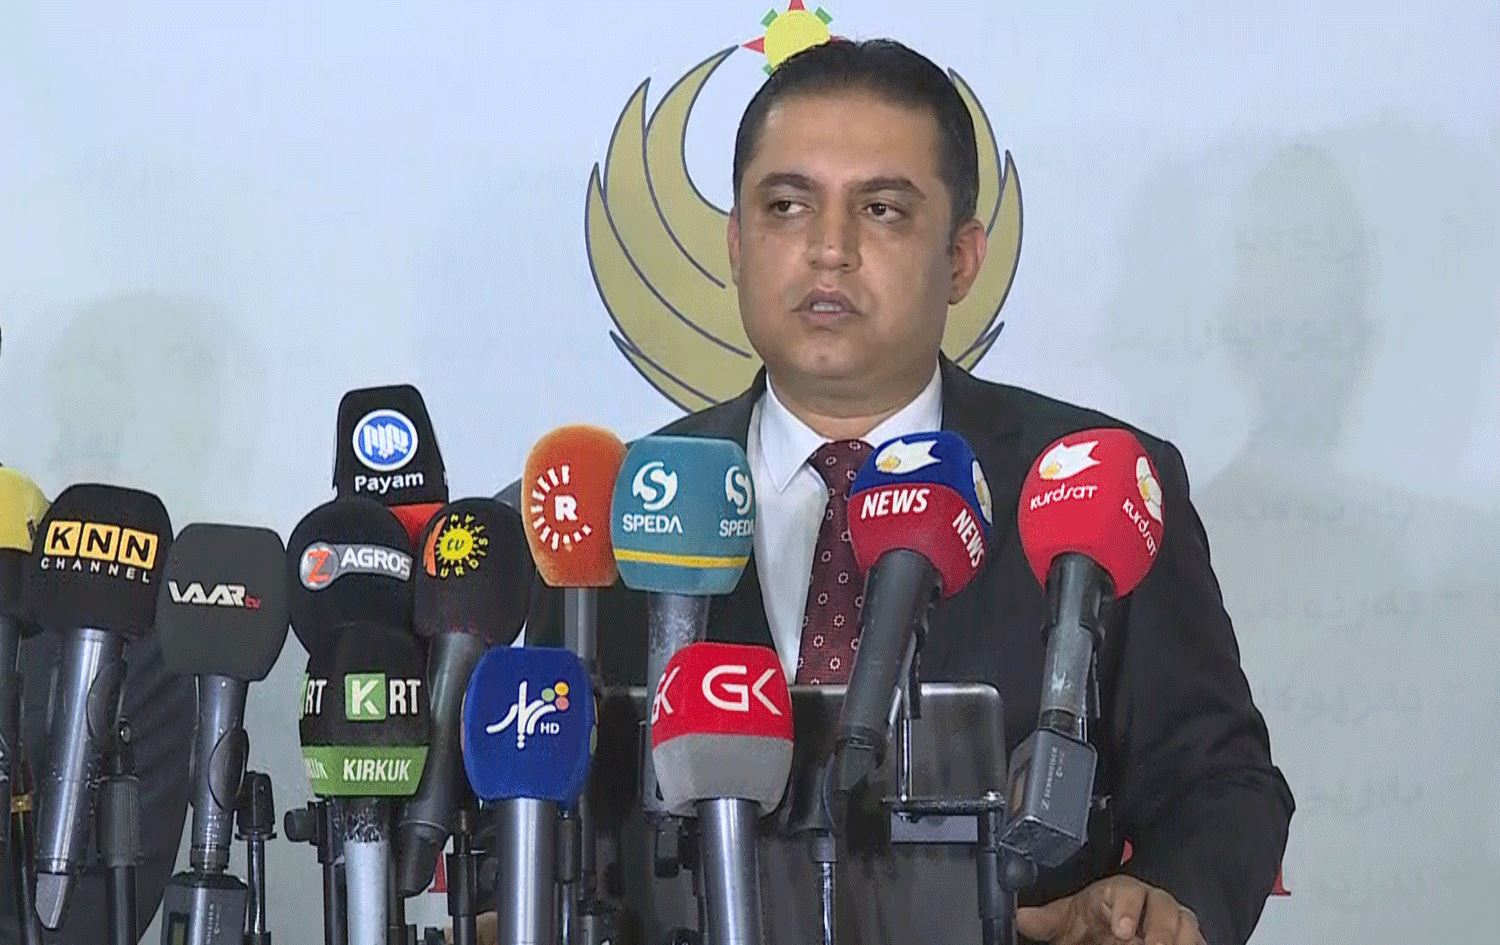 Minister KRG contacted Iraqi PM to push for teacher appointments